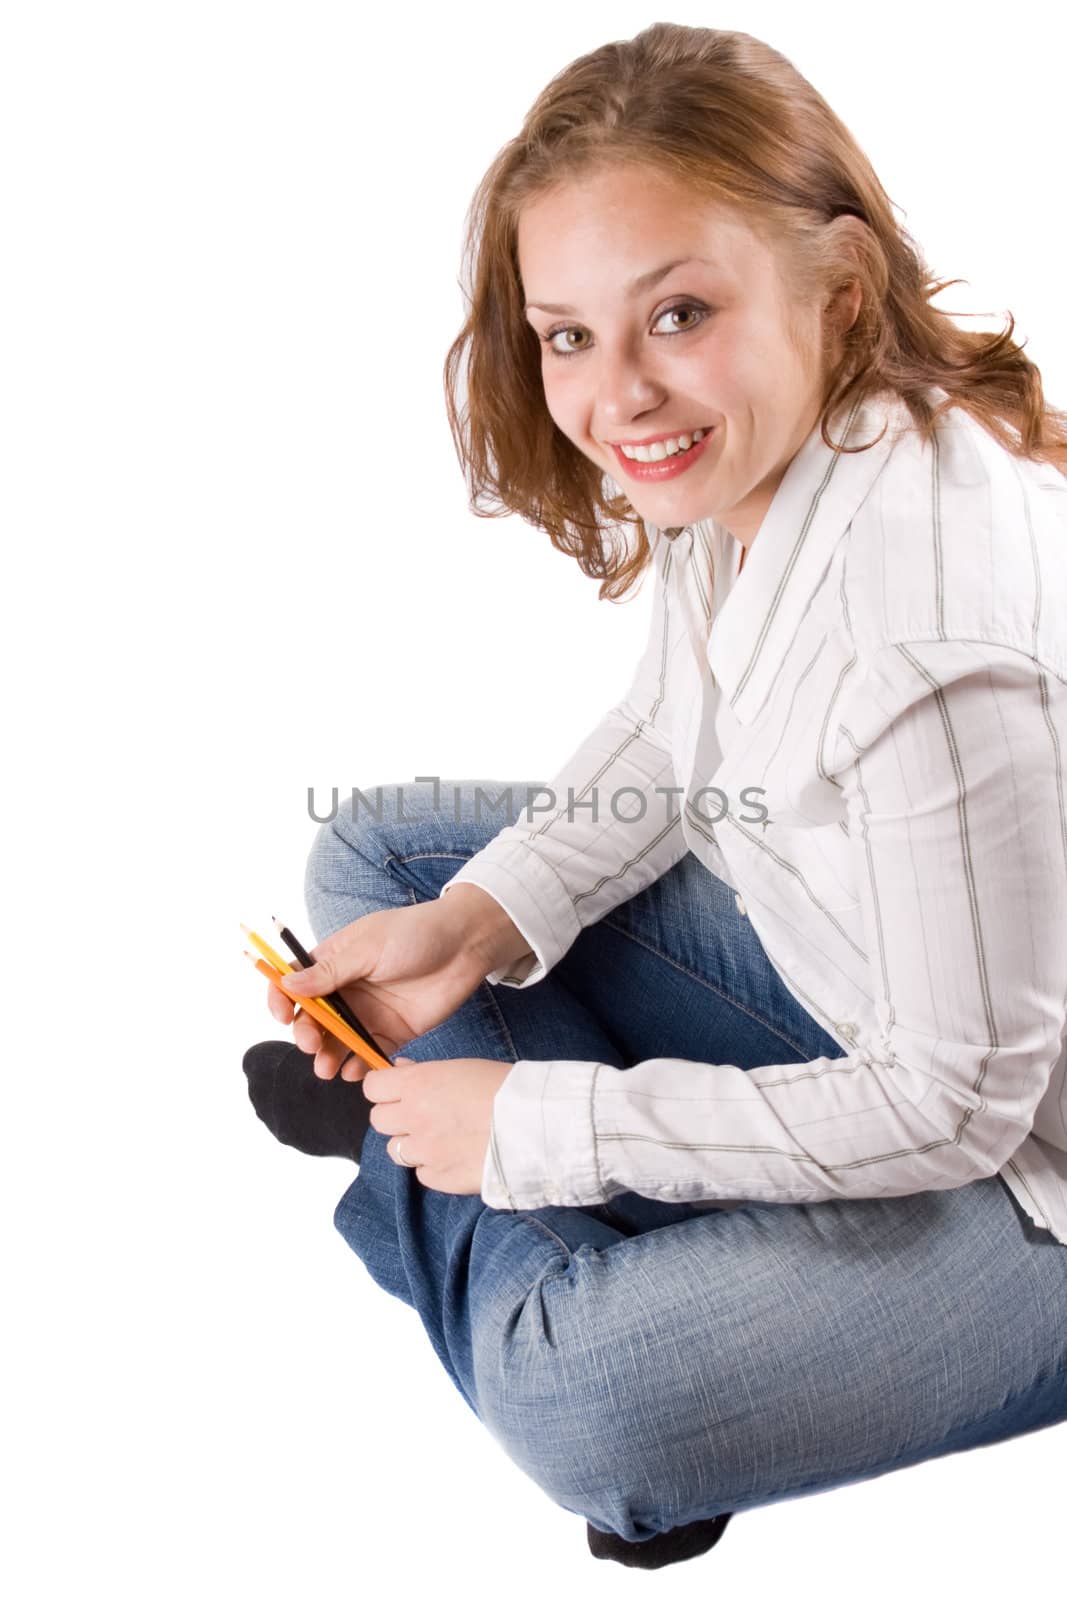 Beautiful girl sitting with crayons. #8 by Amidos